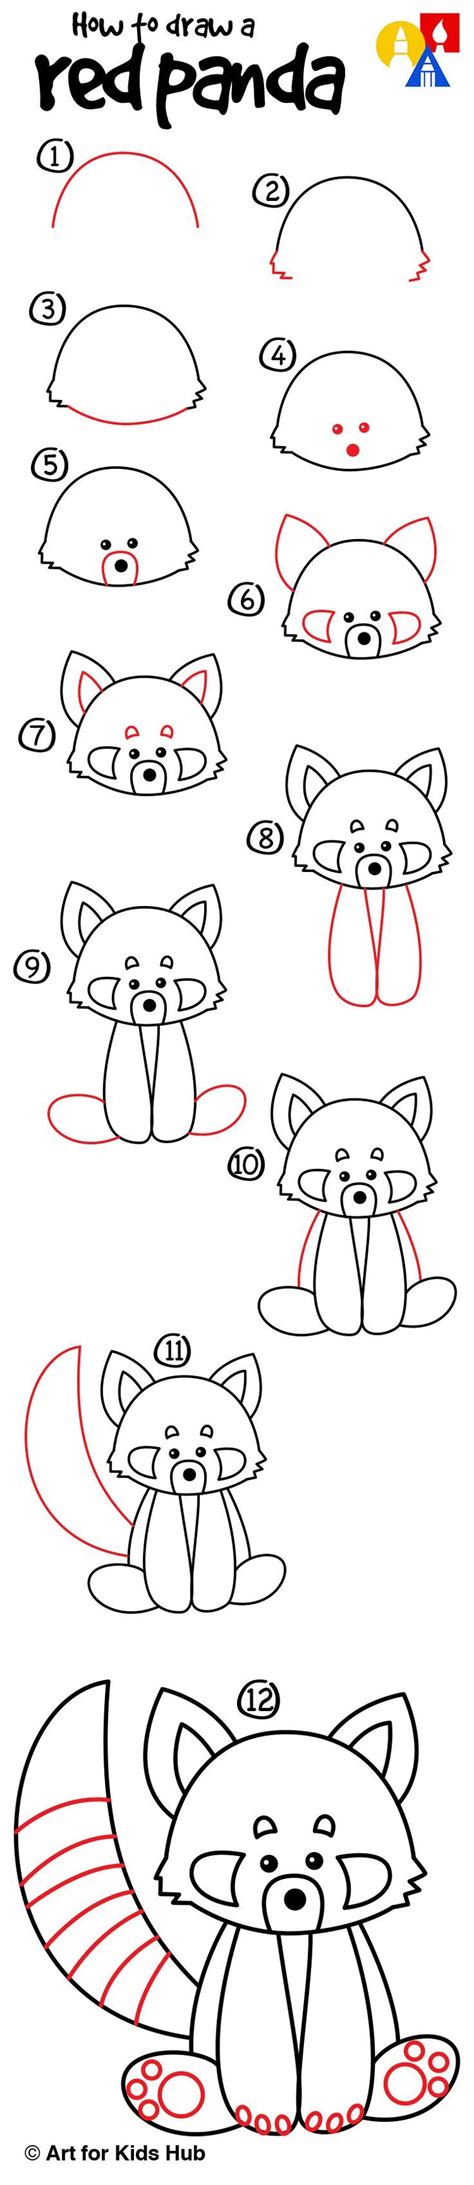 How To Draw A Red Panda Art For Kids Hub Art For